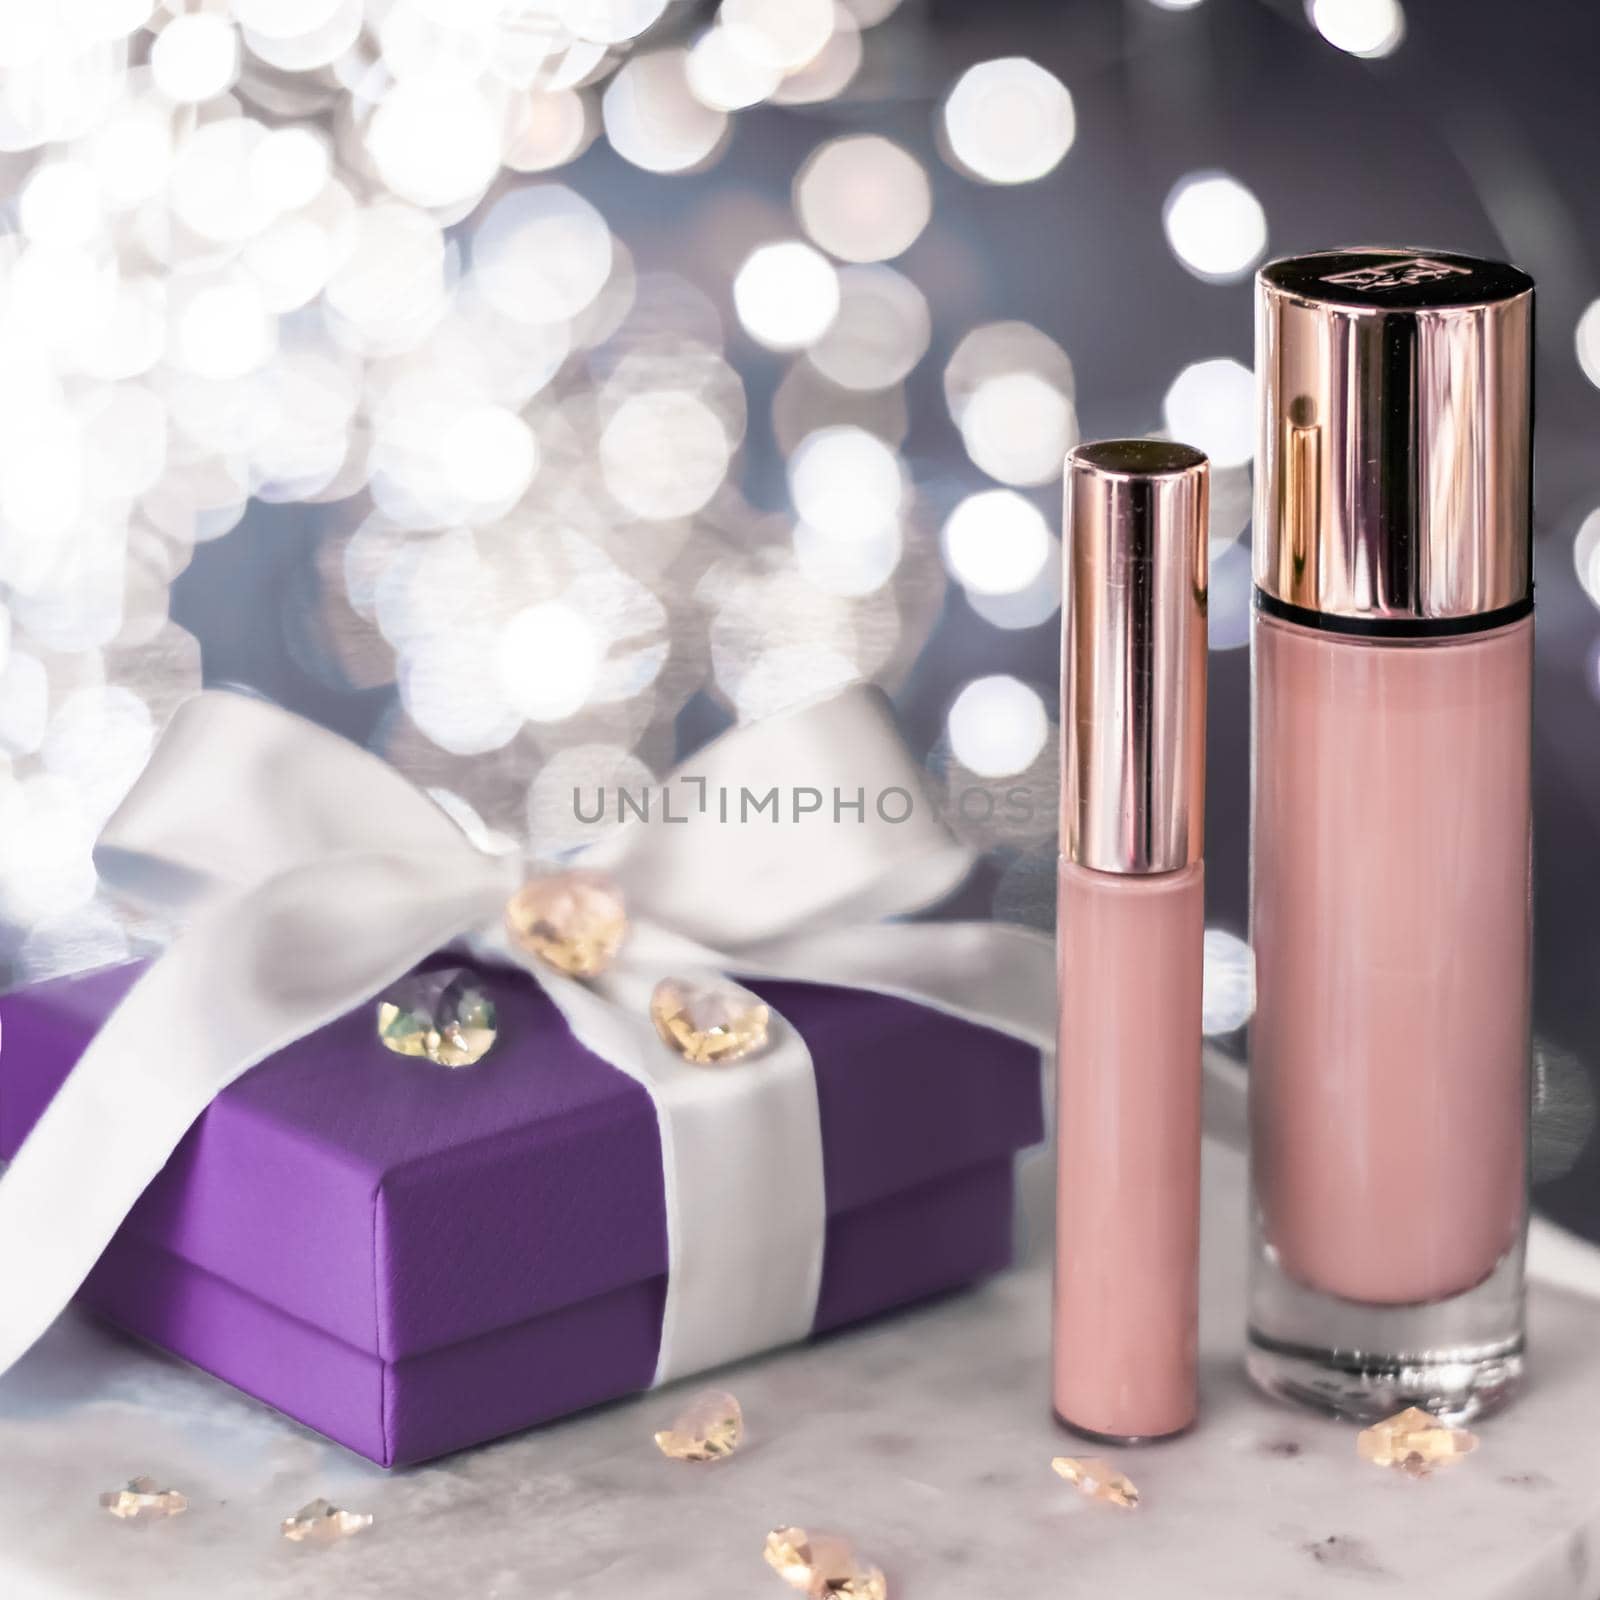 Cosmetic branding, Christmas glitter and girly blog concept - Holiday make-up foundation base, concealer and purple gift box, luxury cosmetics present and blank label products for beauty brand design